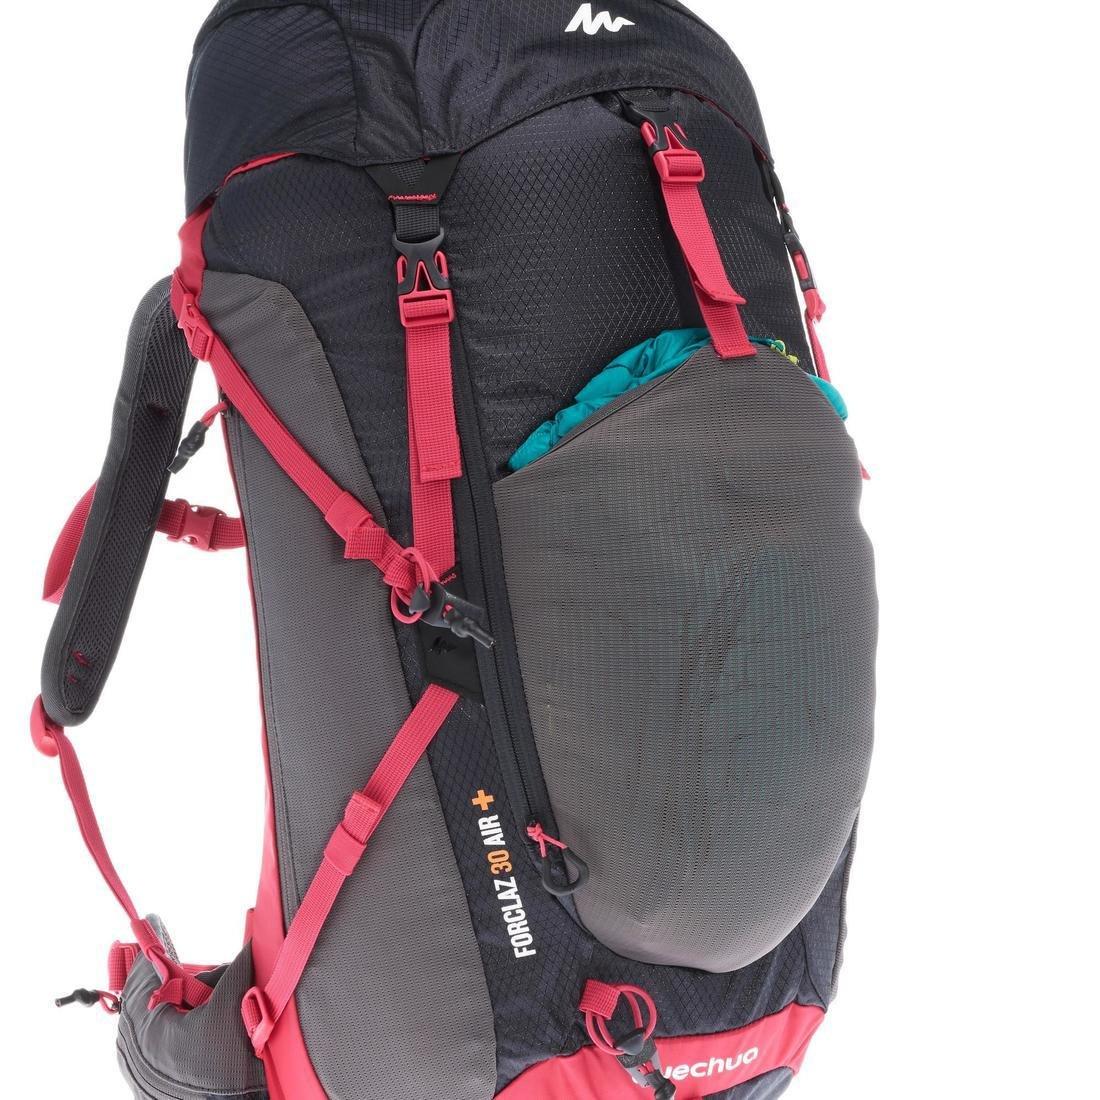 QUECHUA - Mh500 Womens  Mountain Hiking Backpack, Carbon Grey